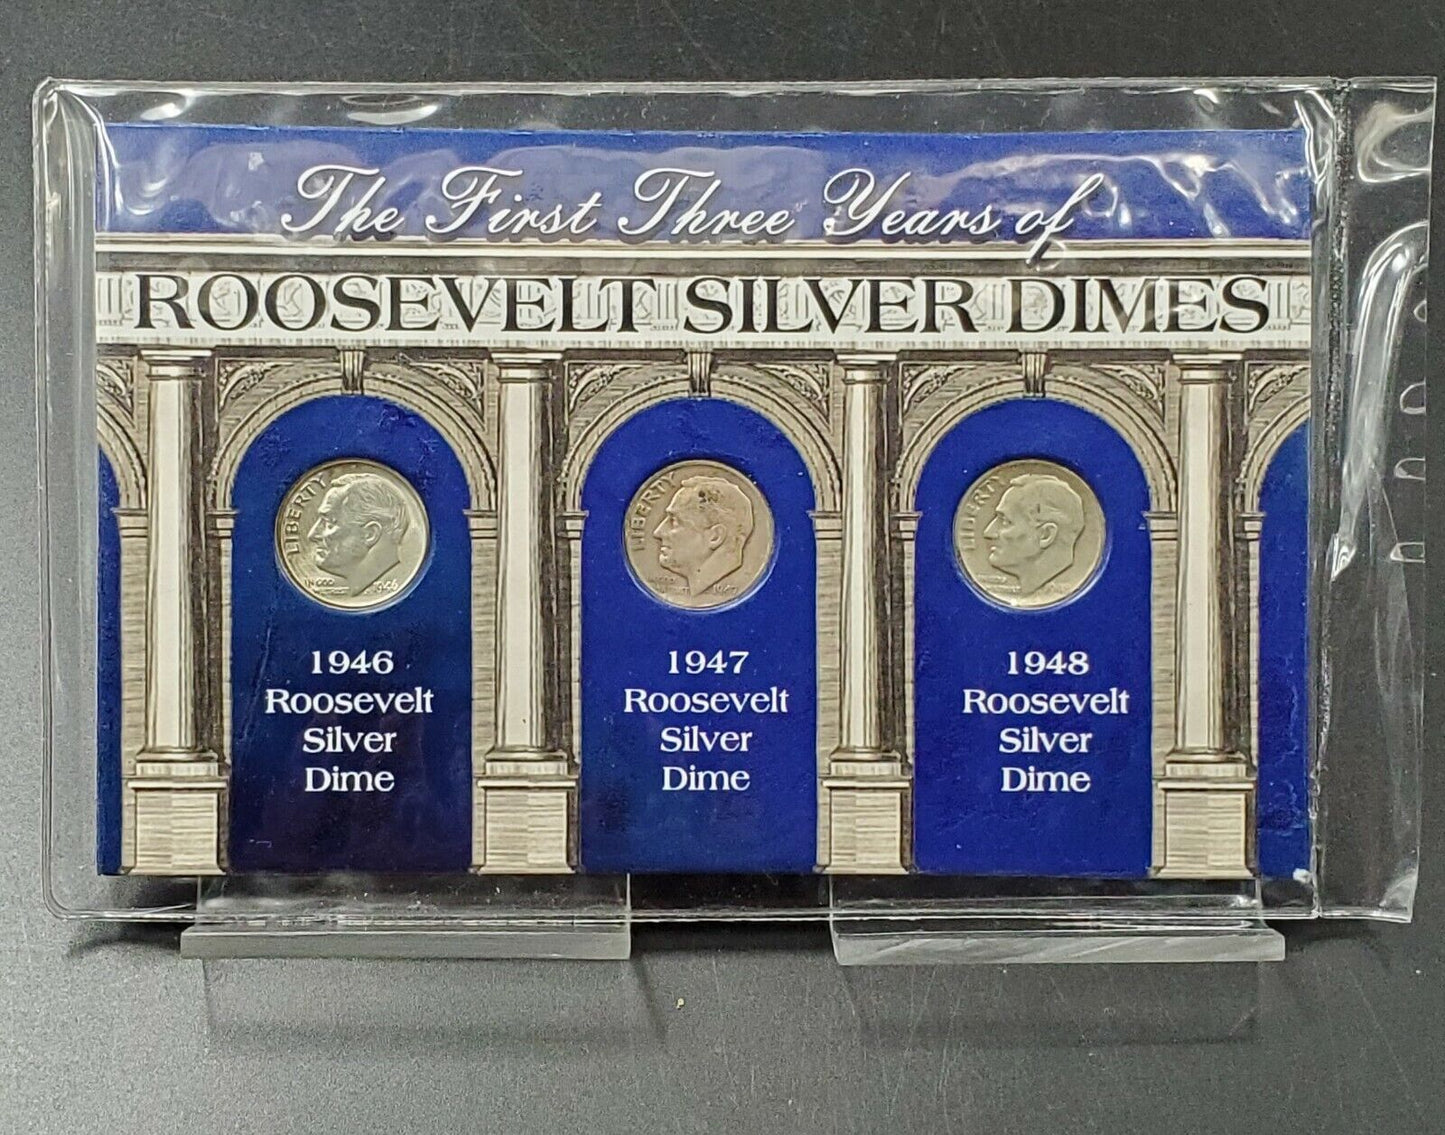 NEW American Coin Treasures First Three Years of Silver Roosevelt Dimes Circ